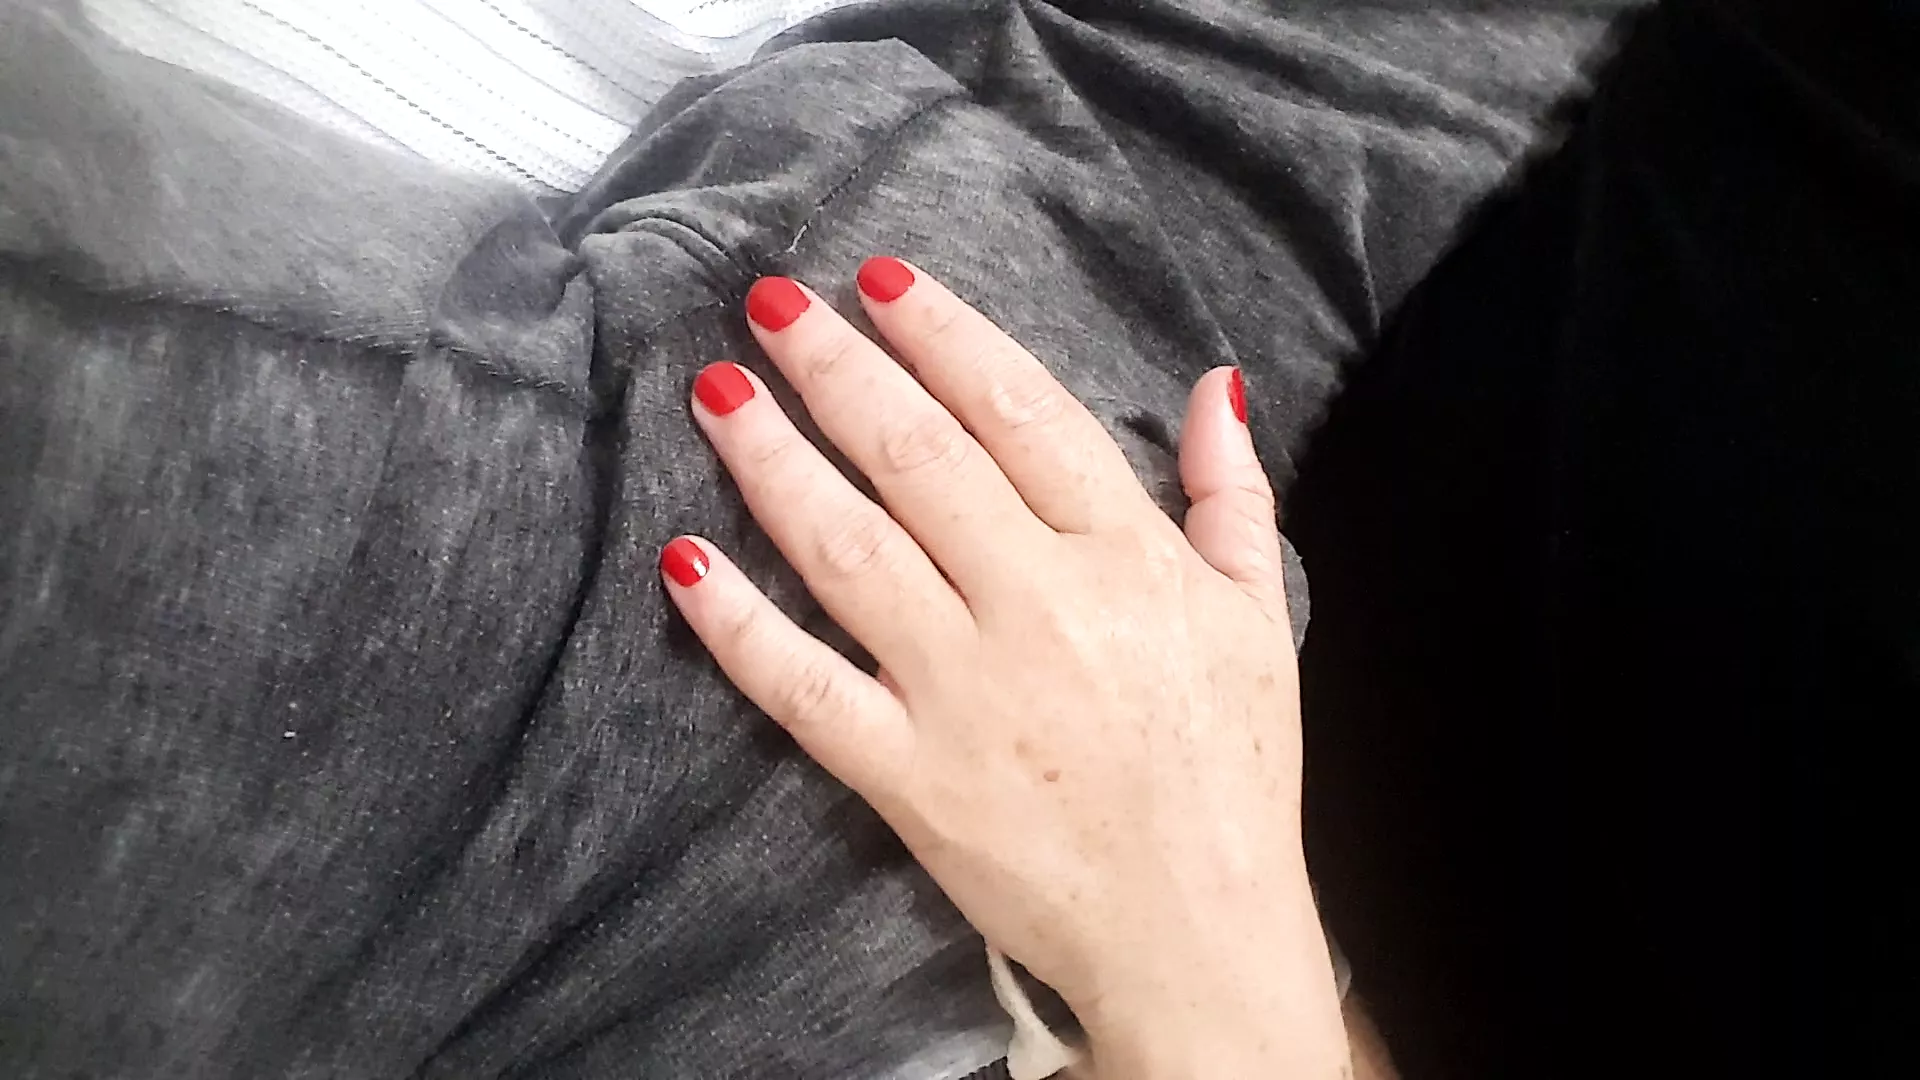 Shy older Gf touches and gropes my cock next to friends picture